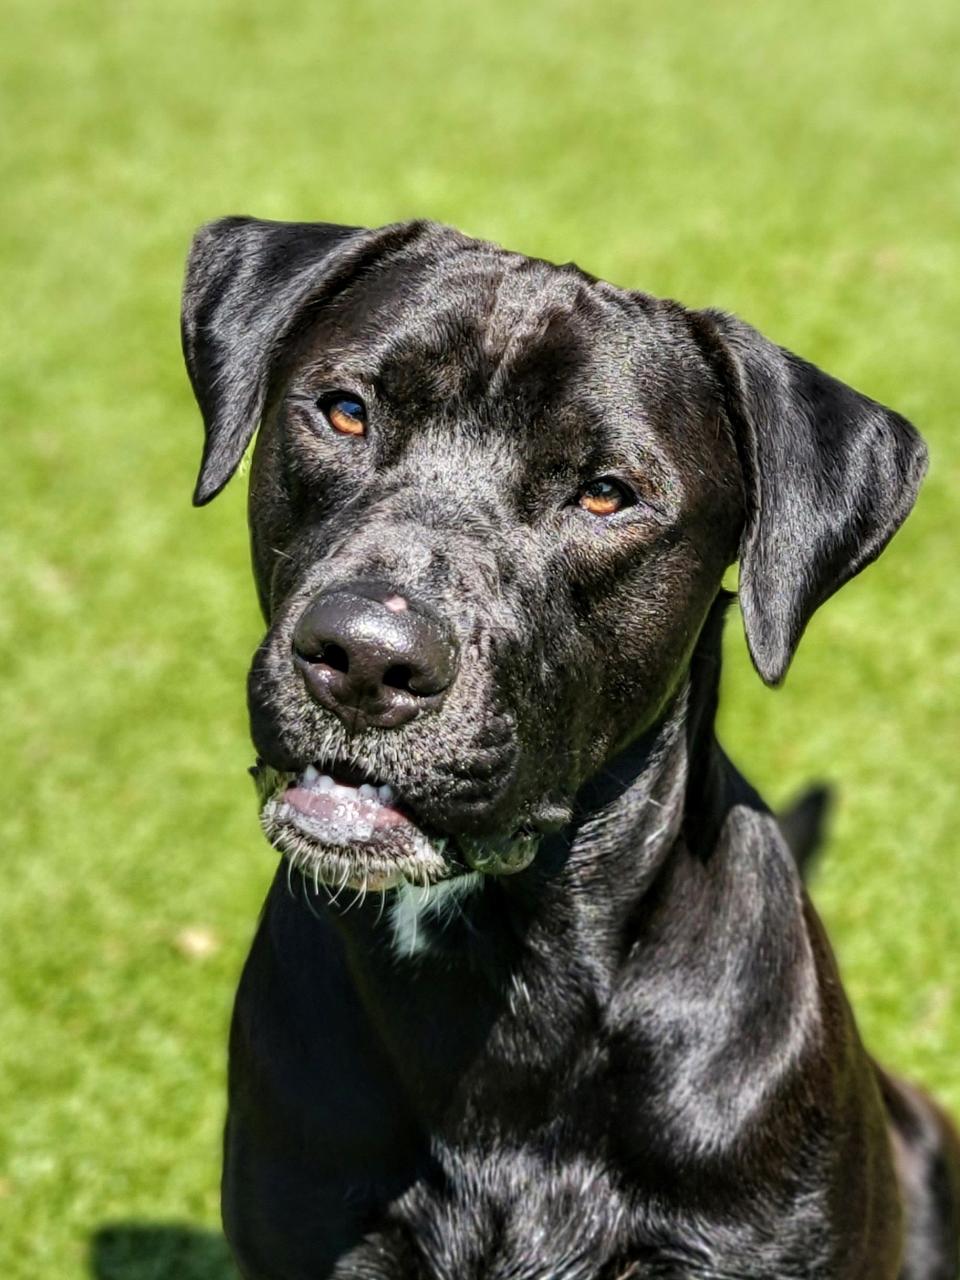 Niko is a big, beautiful black dog that loves to play in the yard with his buddies. He pulls a little on the leash but his manners are improving every day. He has a kind heart and would love to go home with you. To meet Niko, call 405-216-7615 or visit the Edmond Animal Shelter, 2424 Old Timbers Drive.